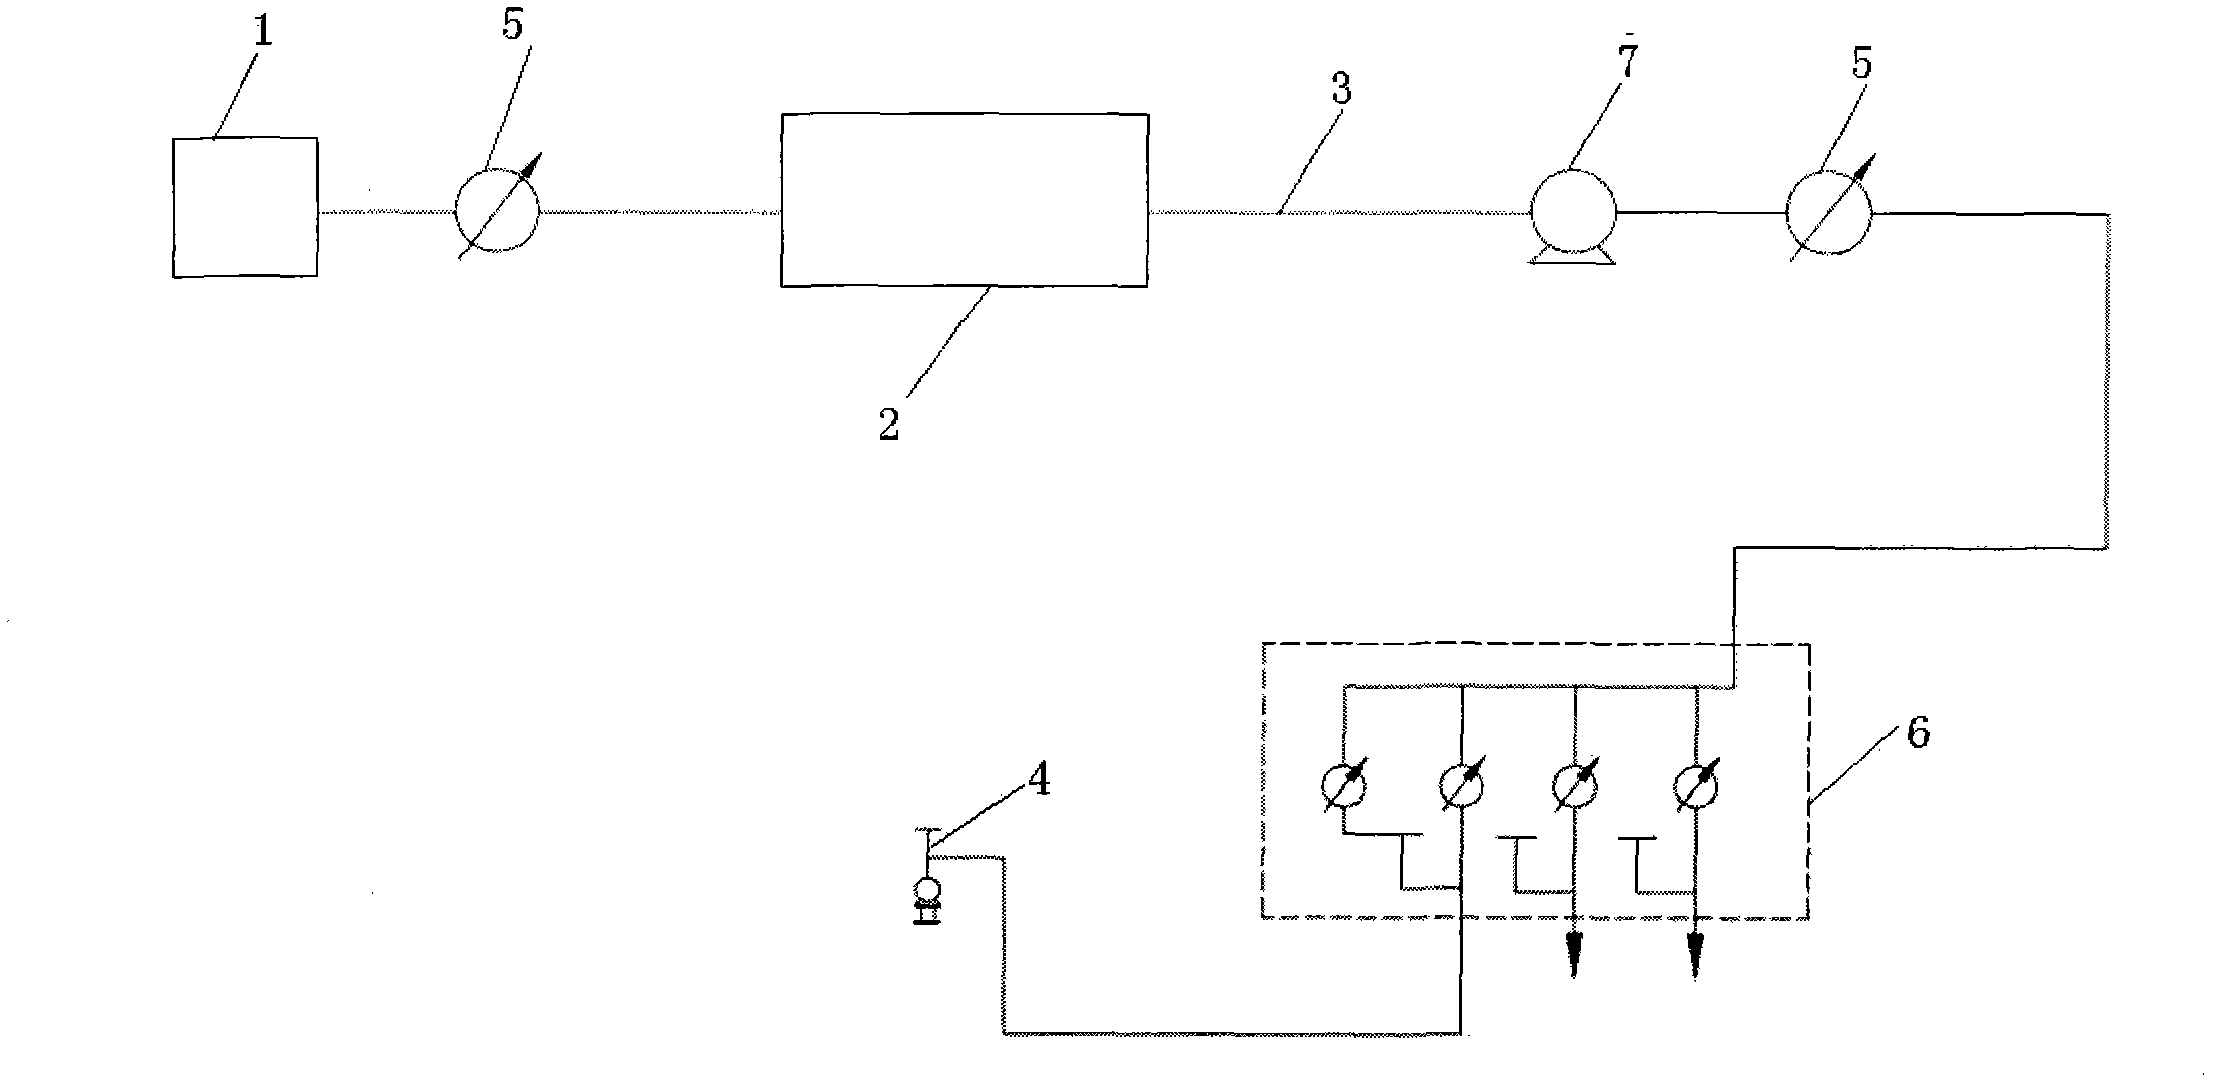 Single main pipe single well water distribution system applied to oil exploitation field and water distribution process thereof